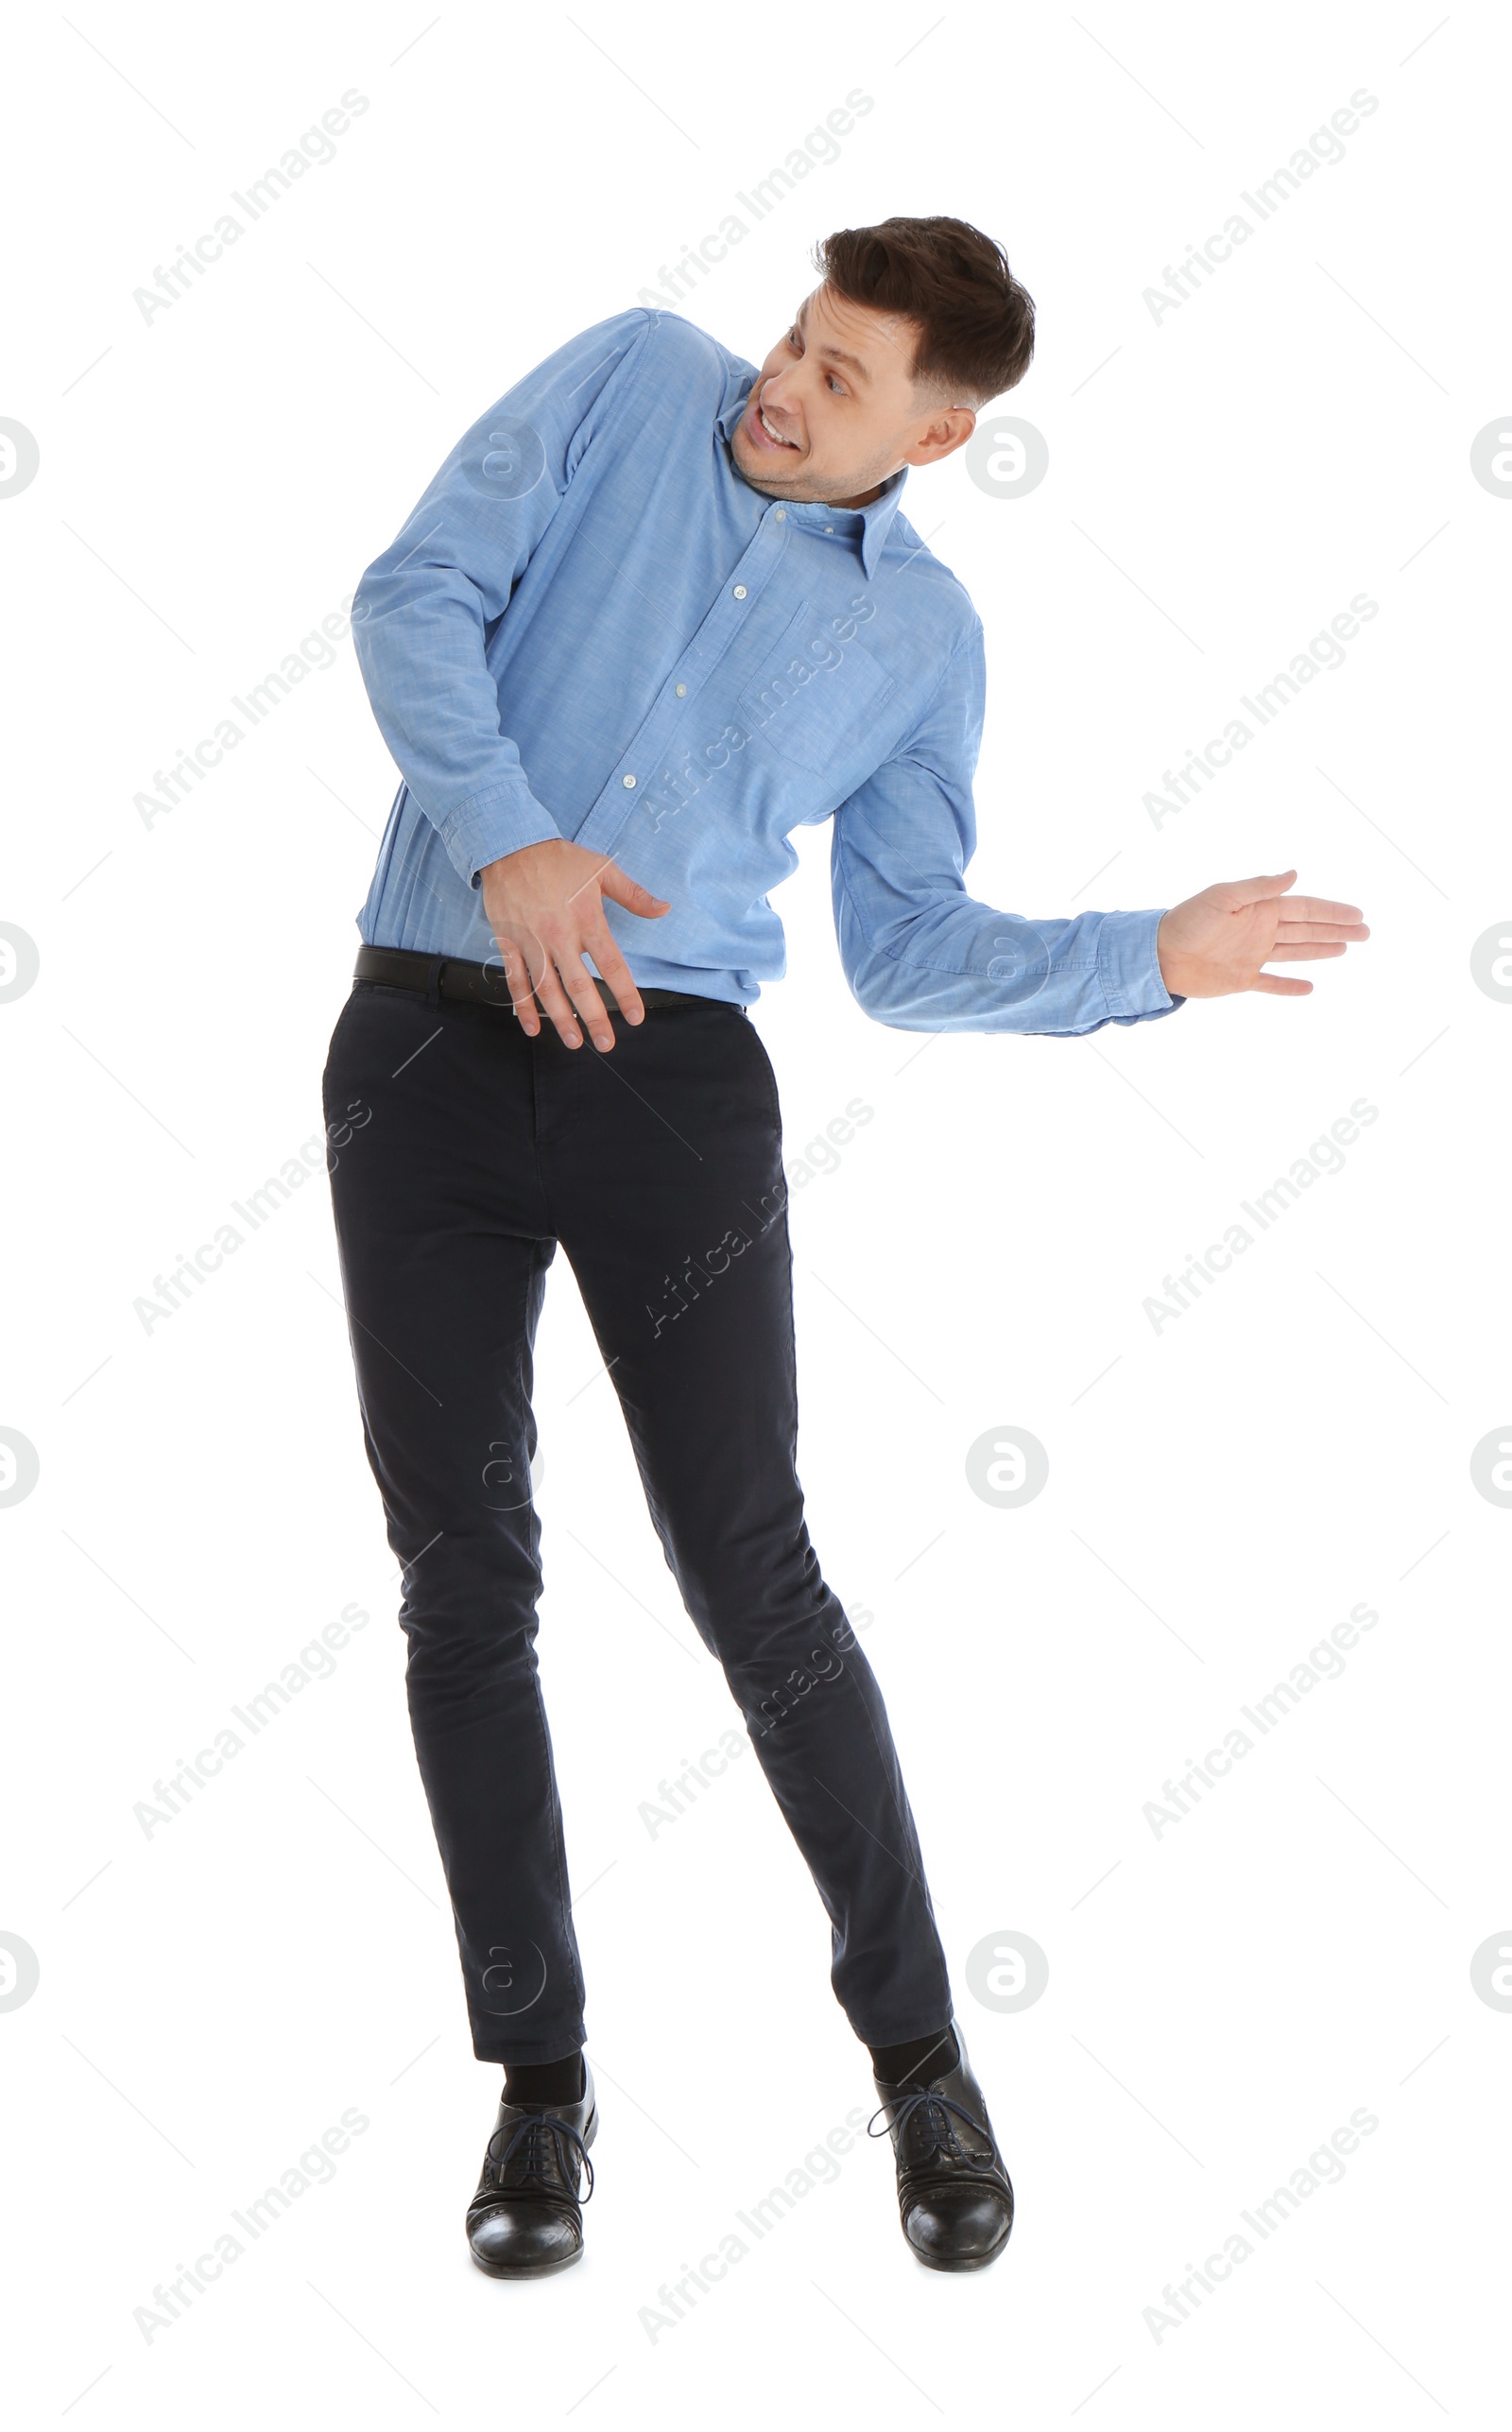 Photo of Emotional man in office wear posing on white background